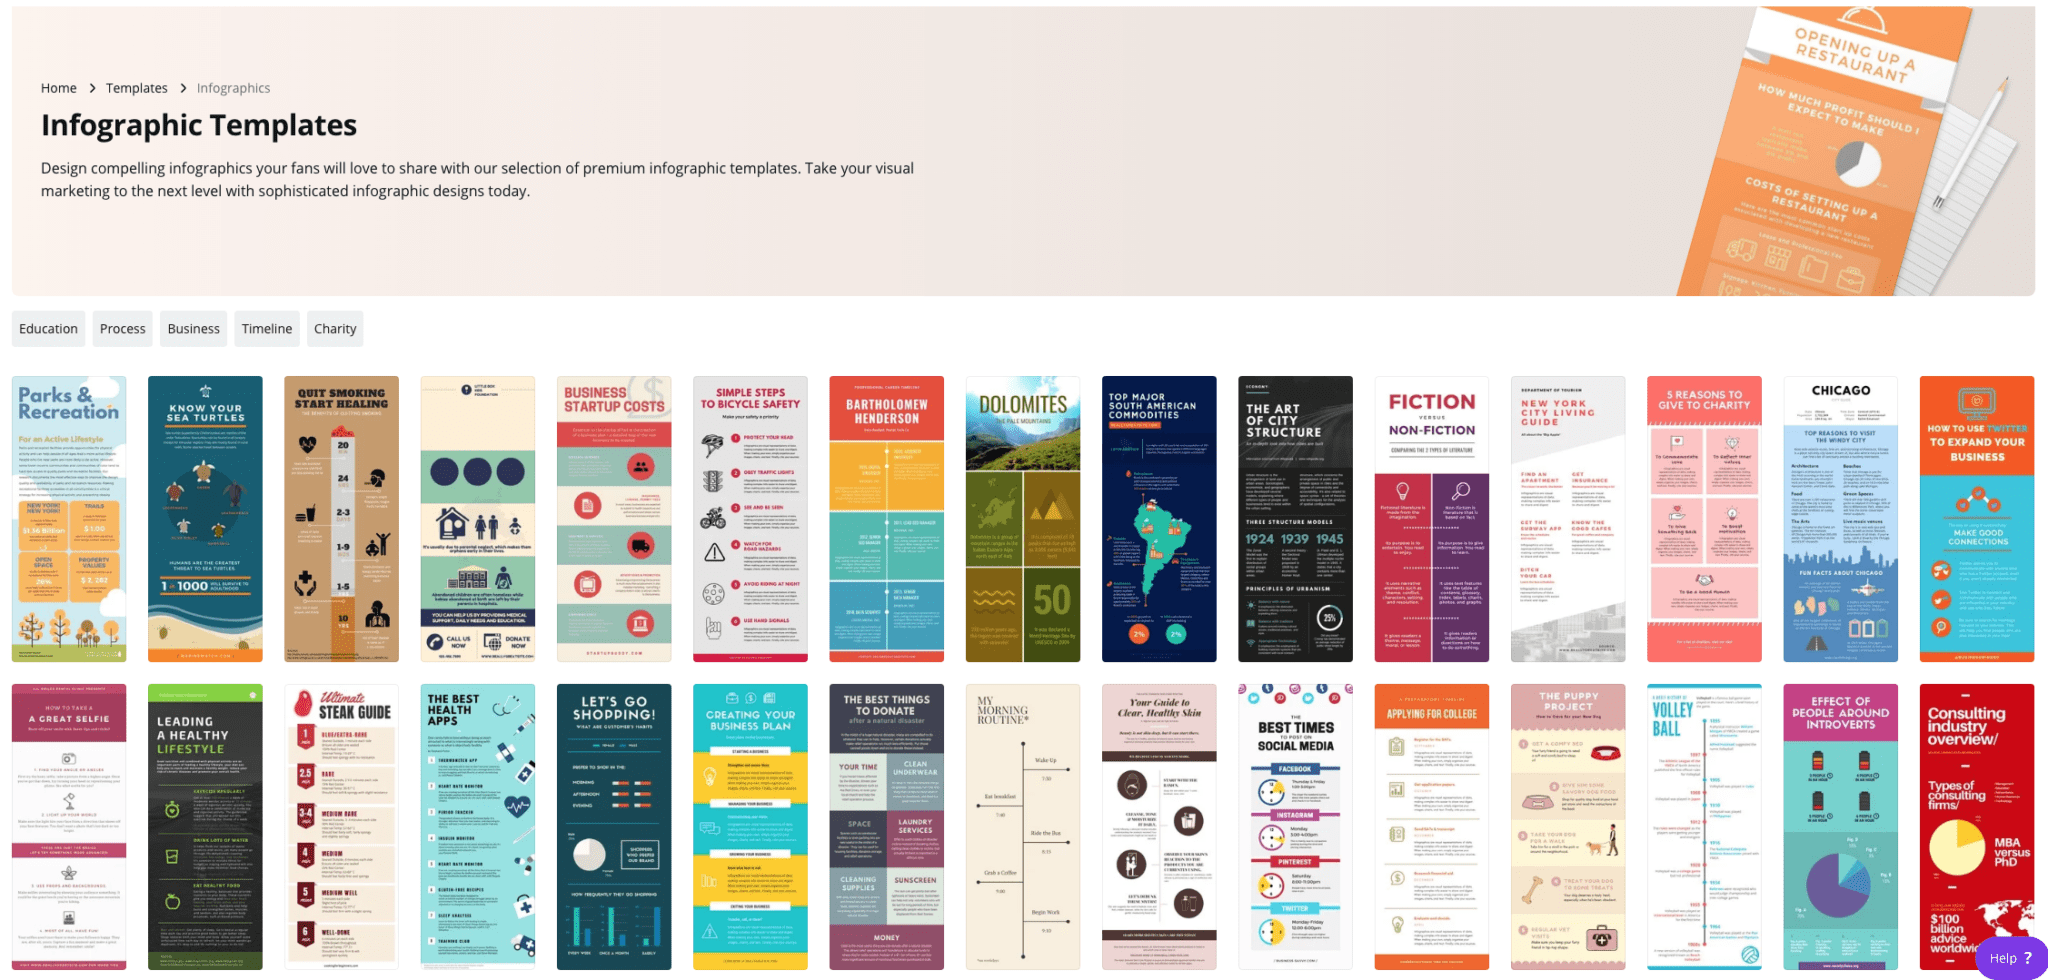 Customize 282+ Infographic templates online - Canva